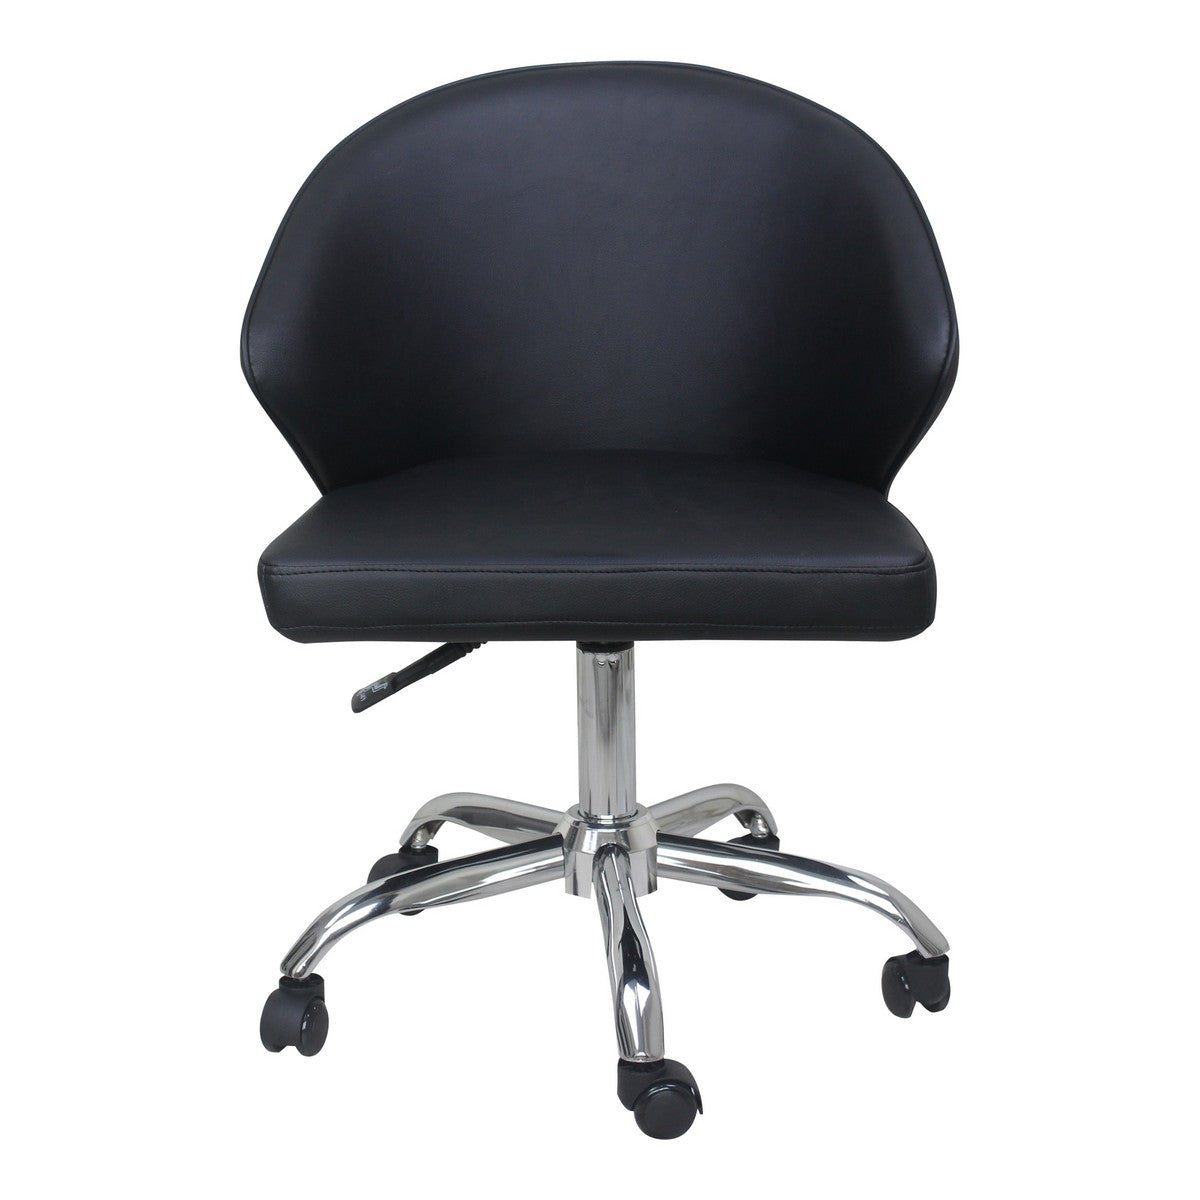 Moe's Home Collection Albus Swivel office Chair Black - UU-1015-02 - Moe's Home Collection - Office Chairs - Minimal And Modern - 1